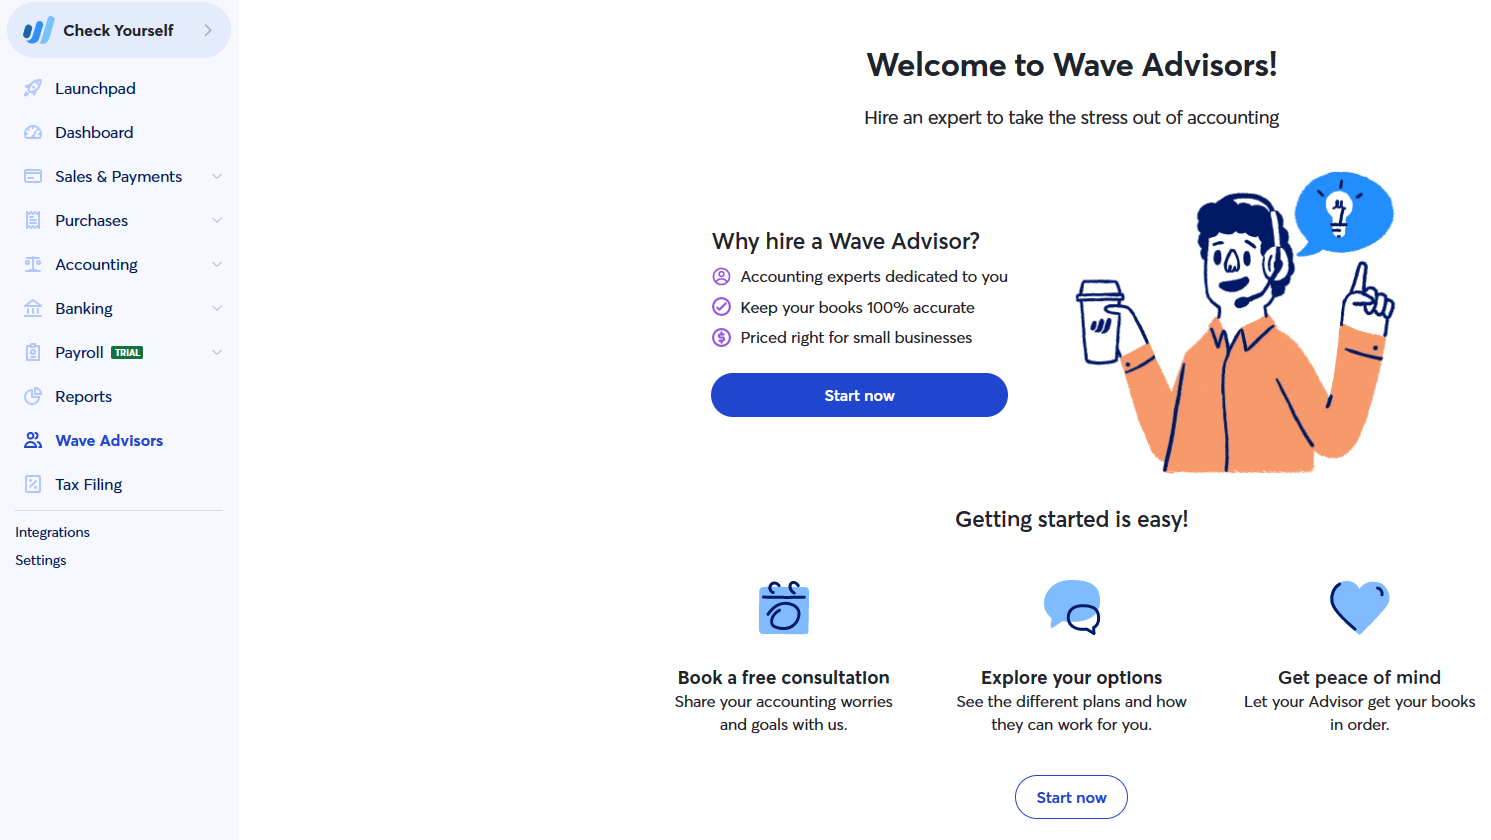 Image of Wave Advisors screen with information on how to sign up.